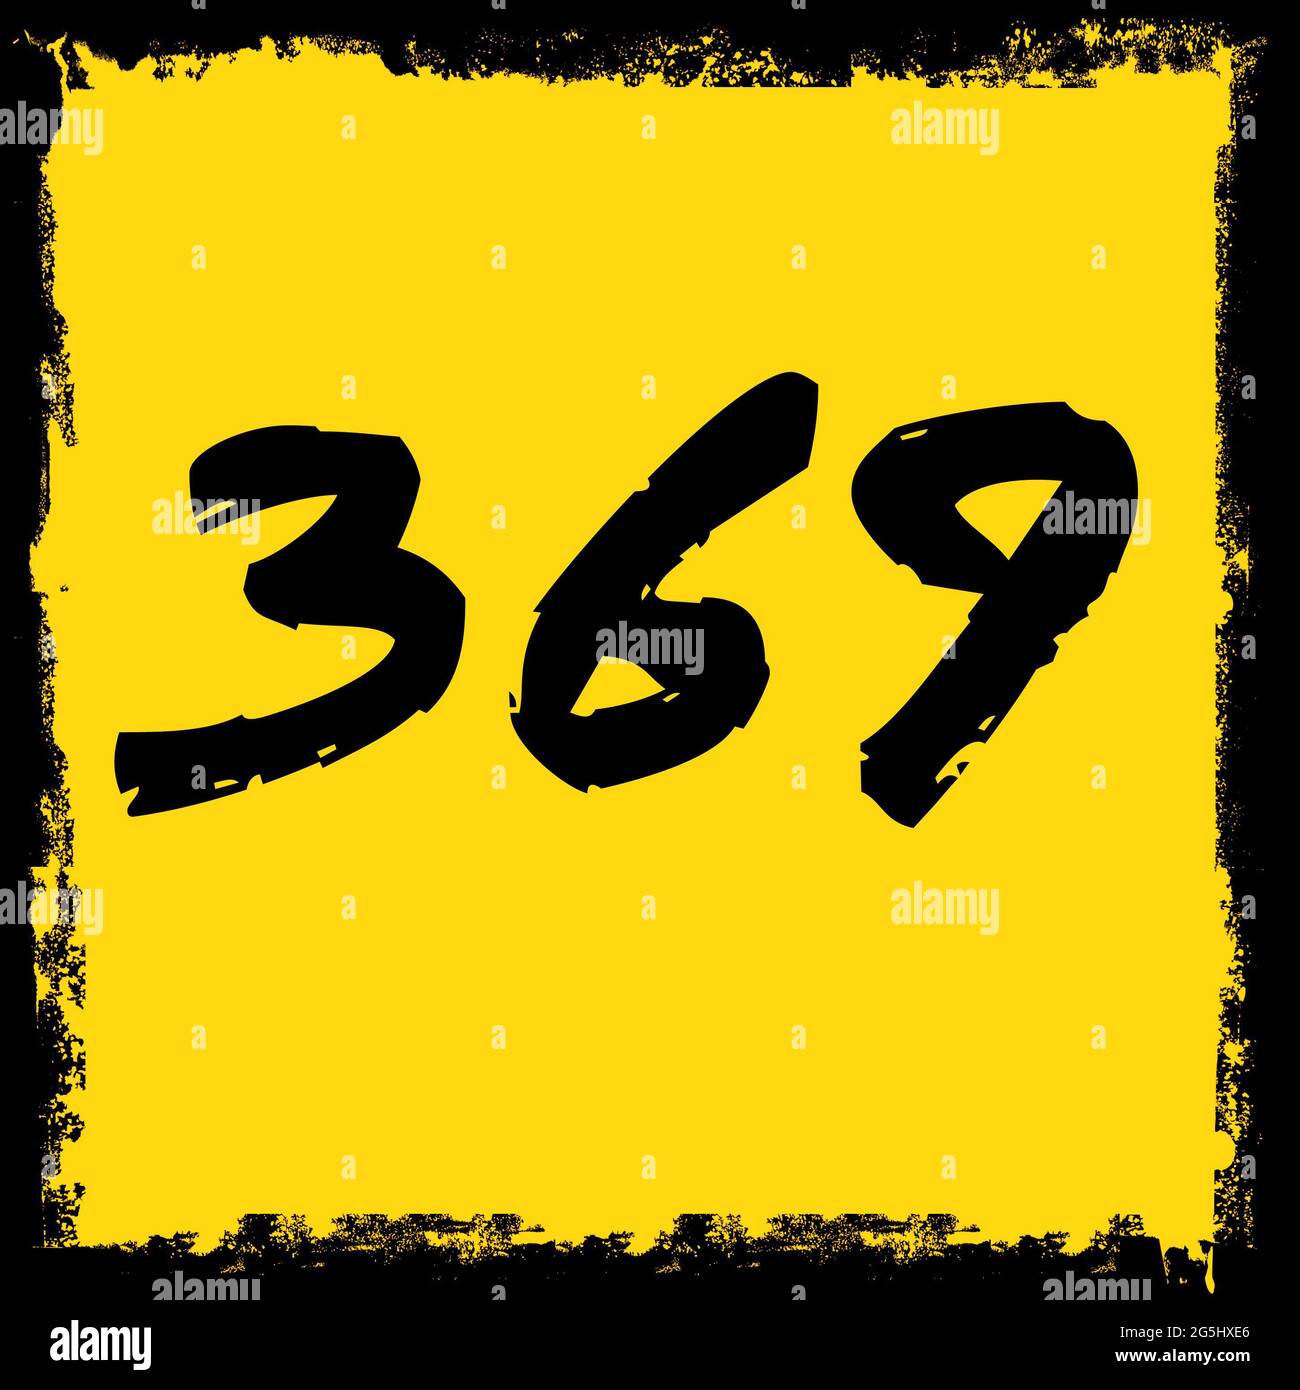 Mysterious 369 number code illustration art background Stock Photo